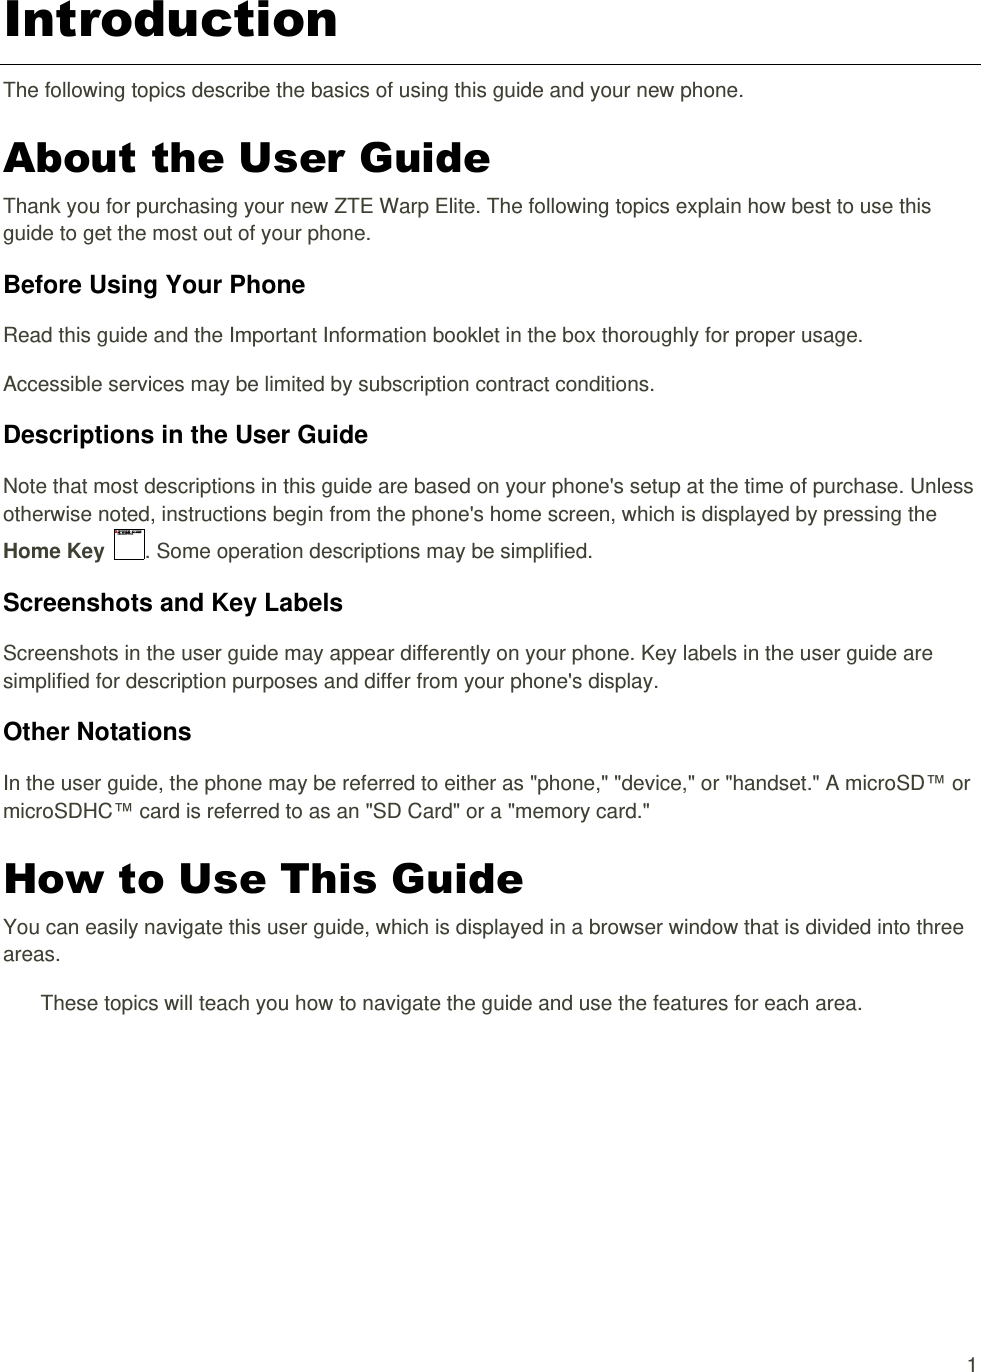   1 Introduction The following topics describe the basics of using this guide and your new phone. About the User Guide Thank you for purchasing your new ZTE Warp Elite. The following topics explain how best to use this guide to get the most out of your phone. Before Using Your Phone Read this guide and the Important Information booklet in the box thoroughly for proper usage. Accessible services may be limited by subscription contract conditions. Descriptions in the User Guide Note that most descriptions in this guide are based on your phone&apos;s setup at the time of purchase. Unless otherwise noted, instructions begin from the phone&apos;s home screen, which is displayed by pressing the Home Key  . Some operation descriptions may be simplified. Screenshots and Key Labels Screenshots in the user guide may appear differently on your phone. Key labels in the user guide are simplified for description purposes and differ from your phone&apos;s display. Other Notations In the user guide, the phone may be referred to either as &quot;phone,&quot; &quot;device,&quot; or &quot;handset.&quot; A microSD™ or microSDHC™ card is referred to as an &quot;SD Card&quot; or a &quot;memory card.&quot; How to Use This Guide You can easily navigate this user guide, which is displayed in a browser window that is divided into three areas. These topics will teach you how to navigate the guide and use the features for each area. 